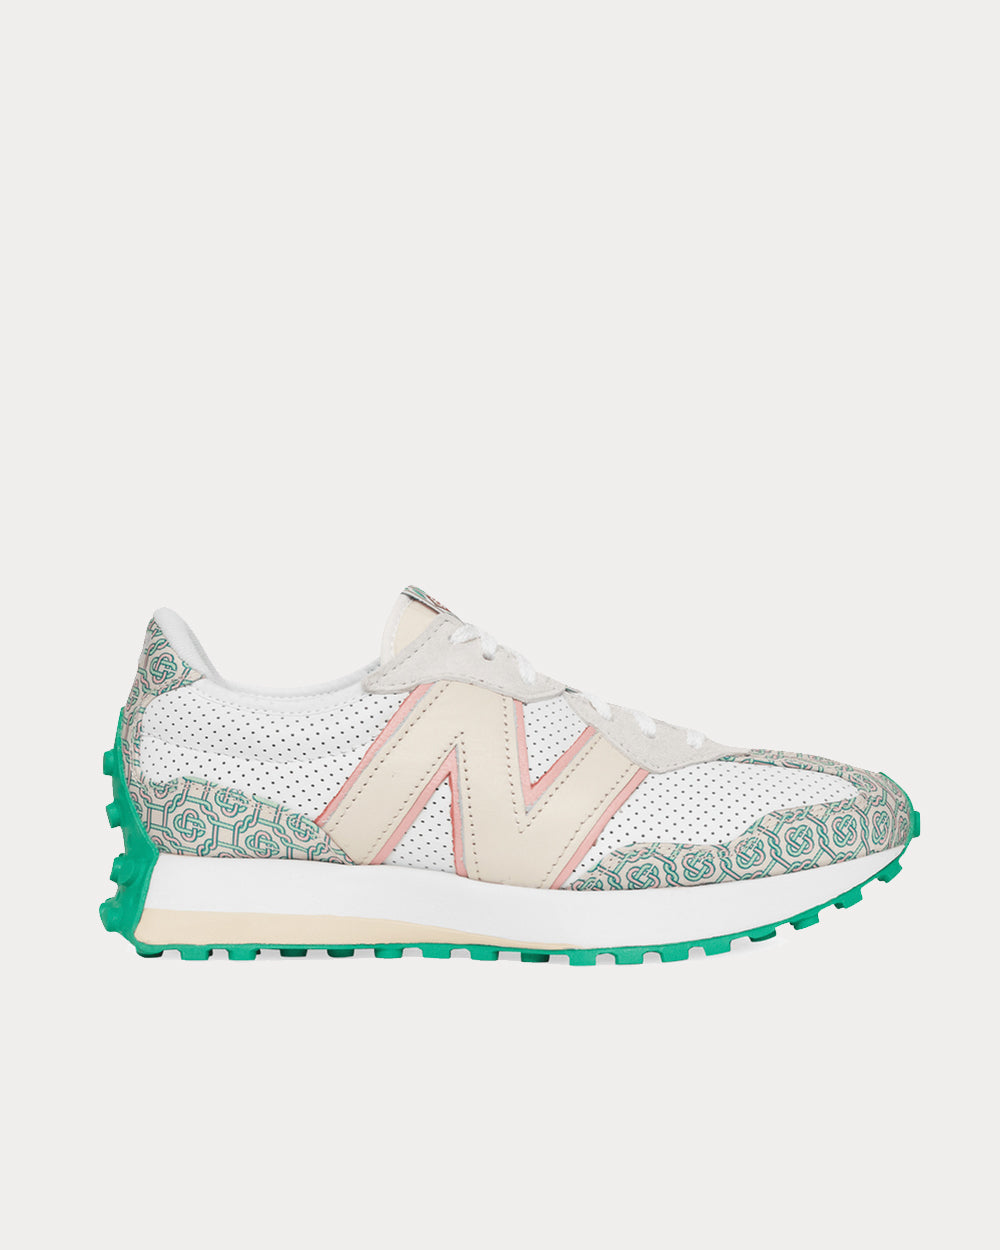 New Balance X Casablanca - 327 Munsell White with Green Low Top Sneakers